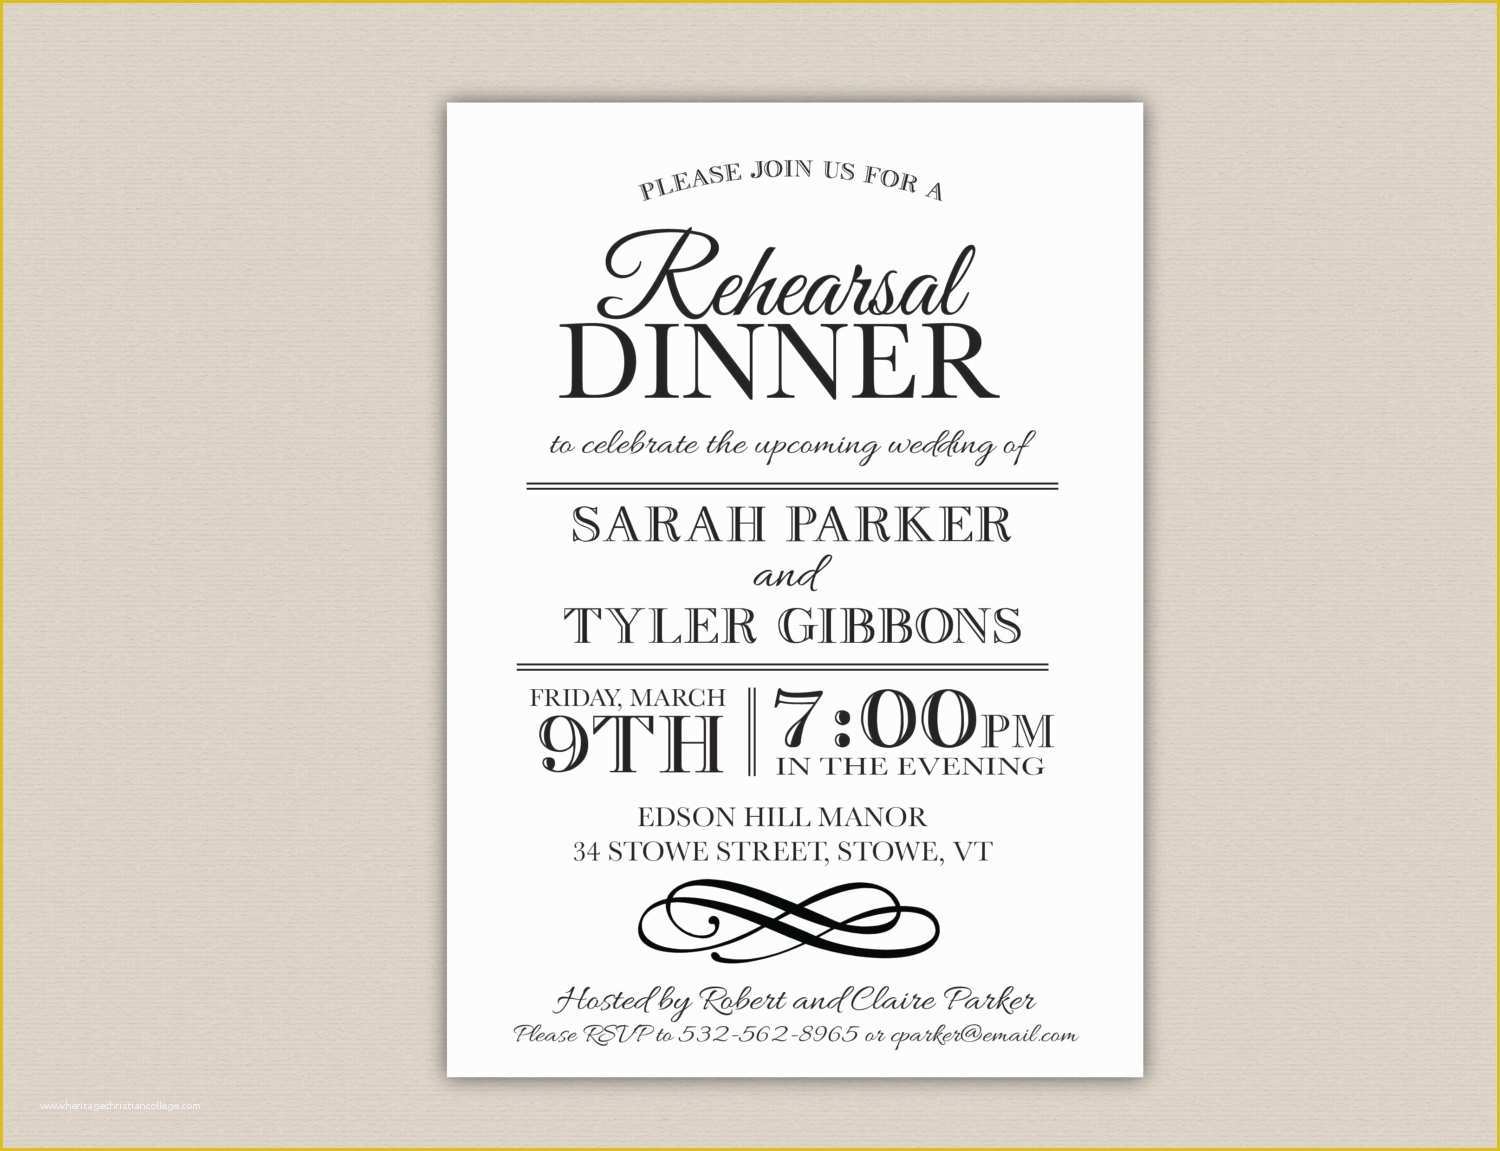 Dinner Invitation Templates Free Download Of Business Invitation Templates Mughals